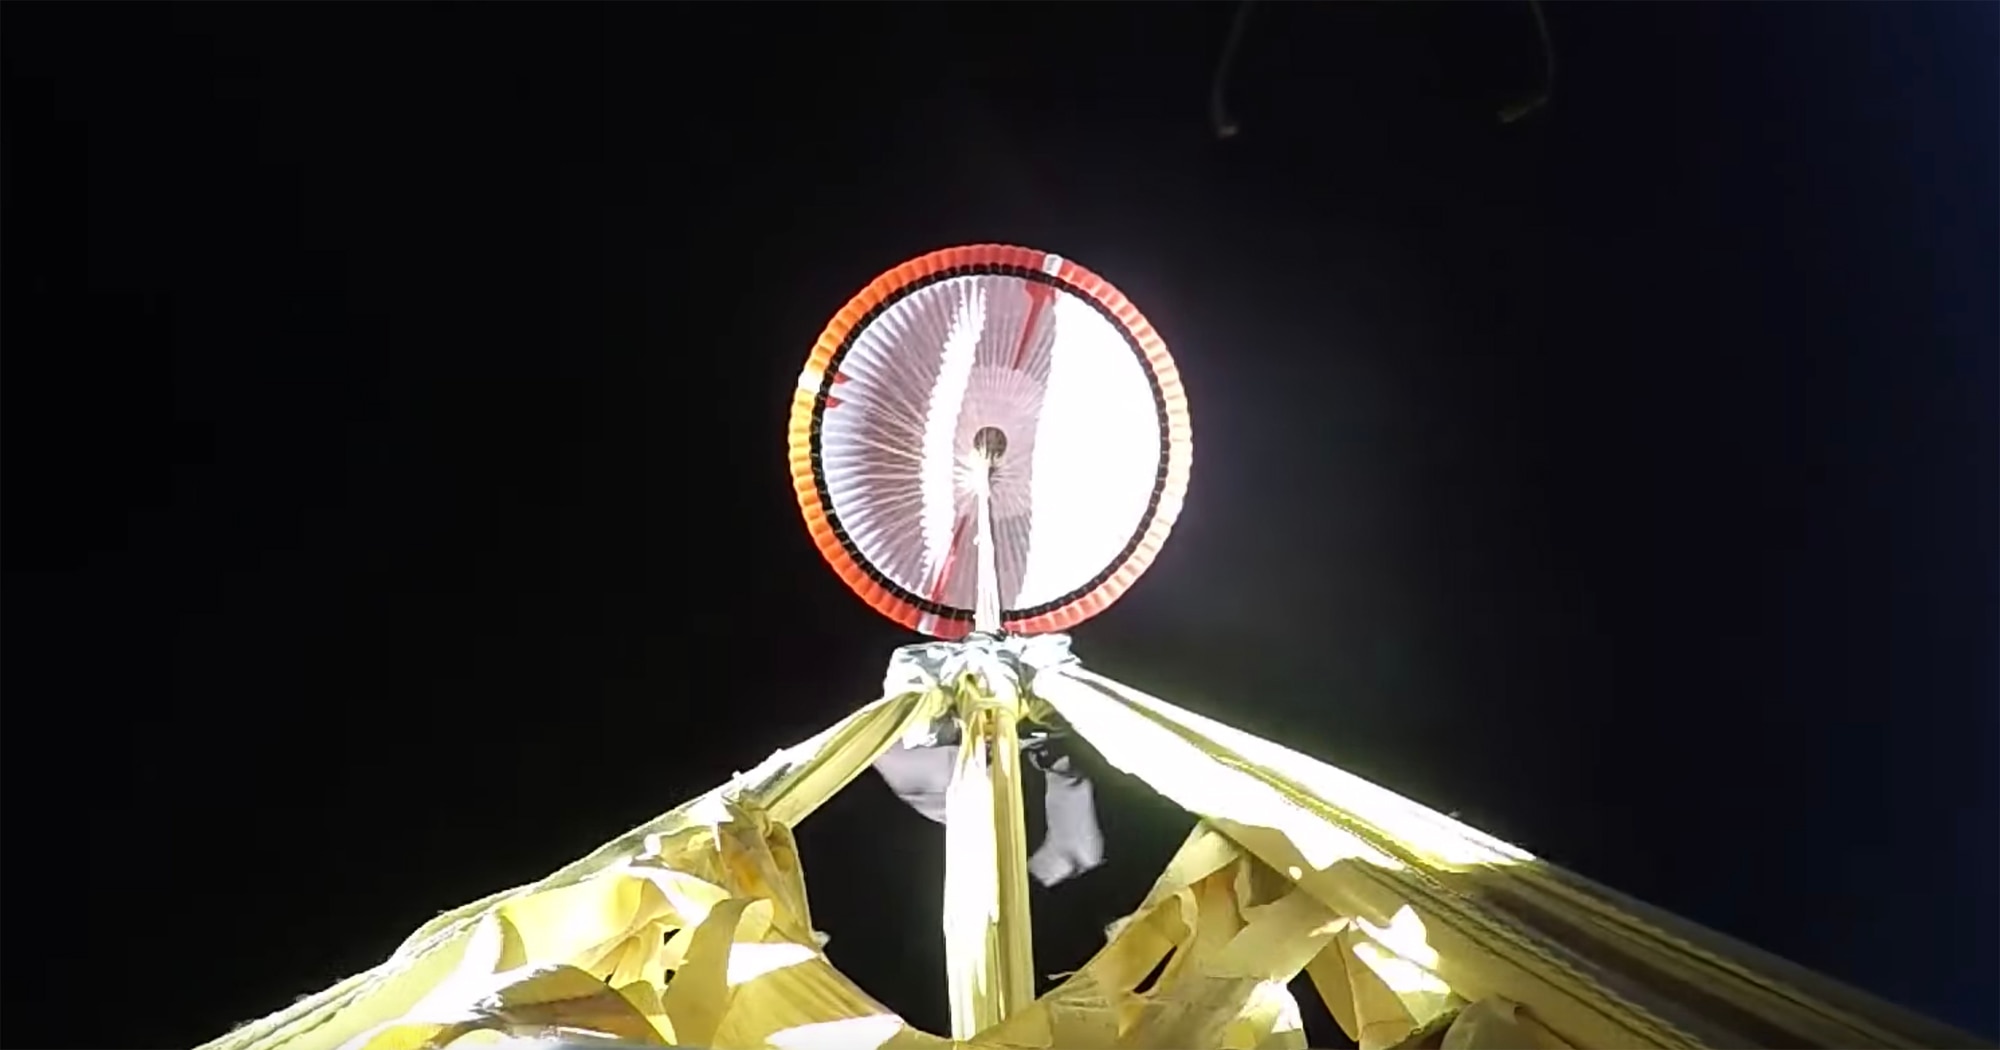 A huge parachute deploys at supersonic speeds above Earth in a test for the Mars 2020 landing. Credit: NASA / JPL